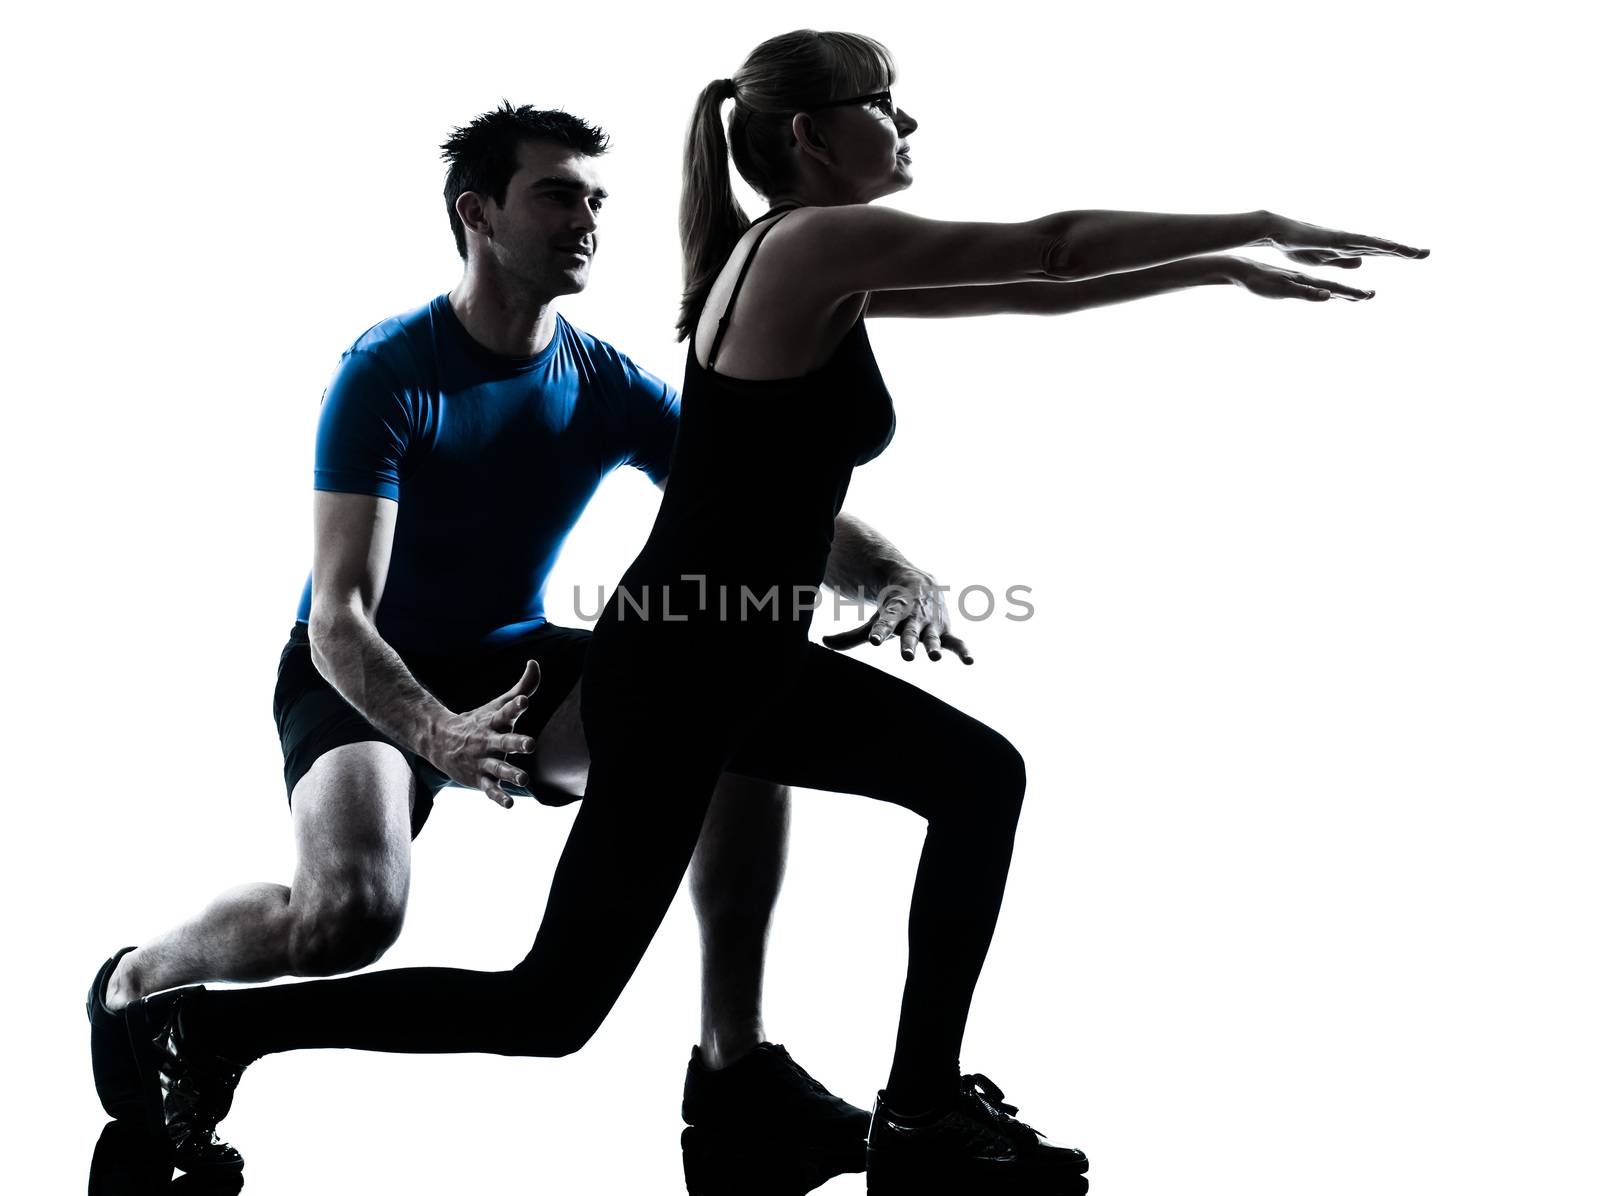 aerobics instructor with mature woman exercising fitness workout in silhouette studio isolated on white background